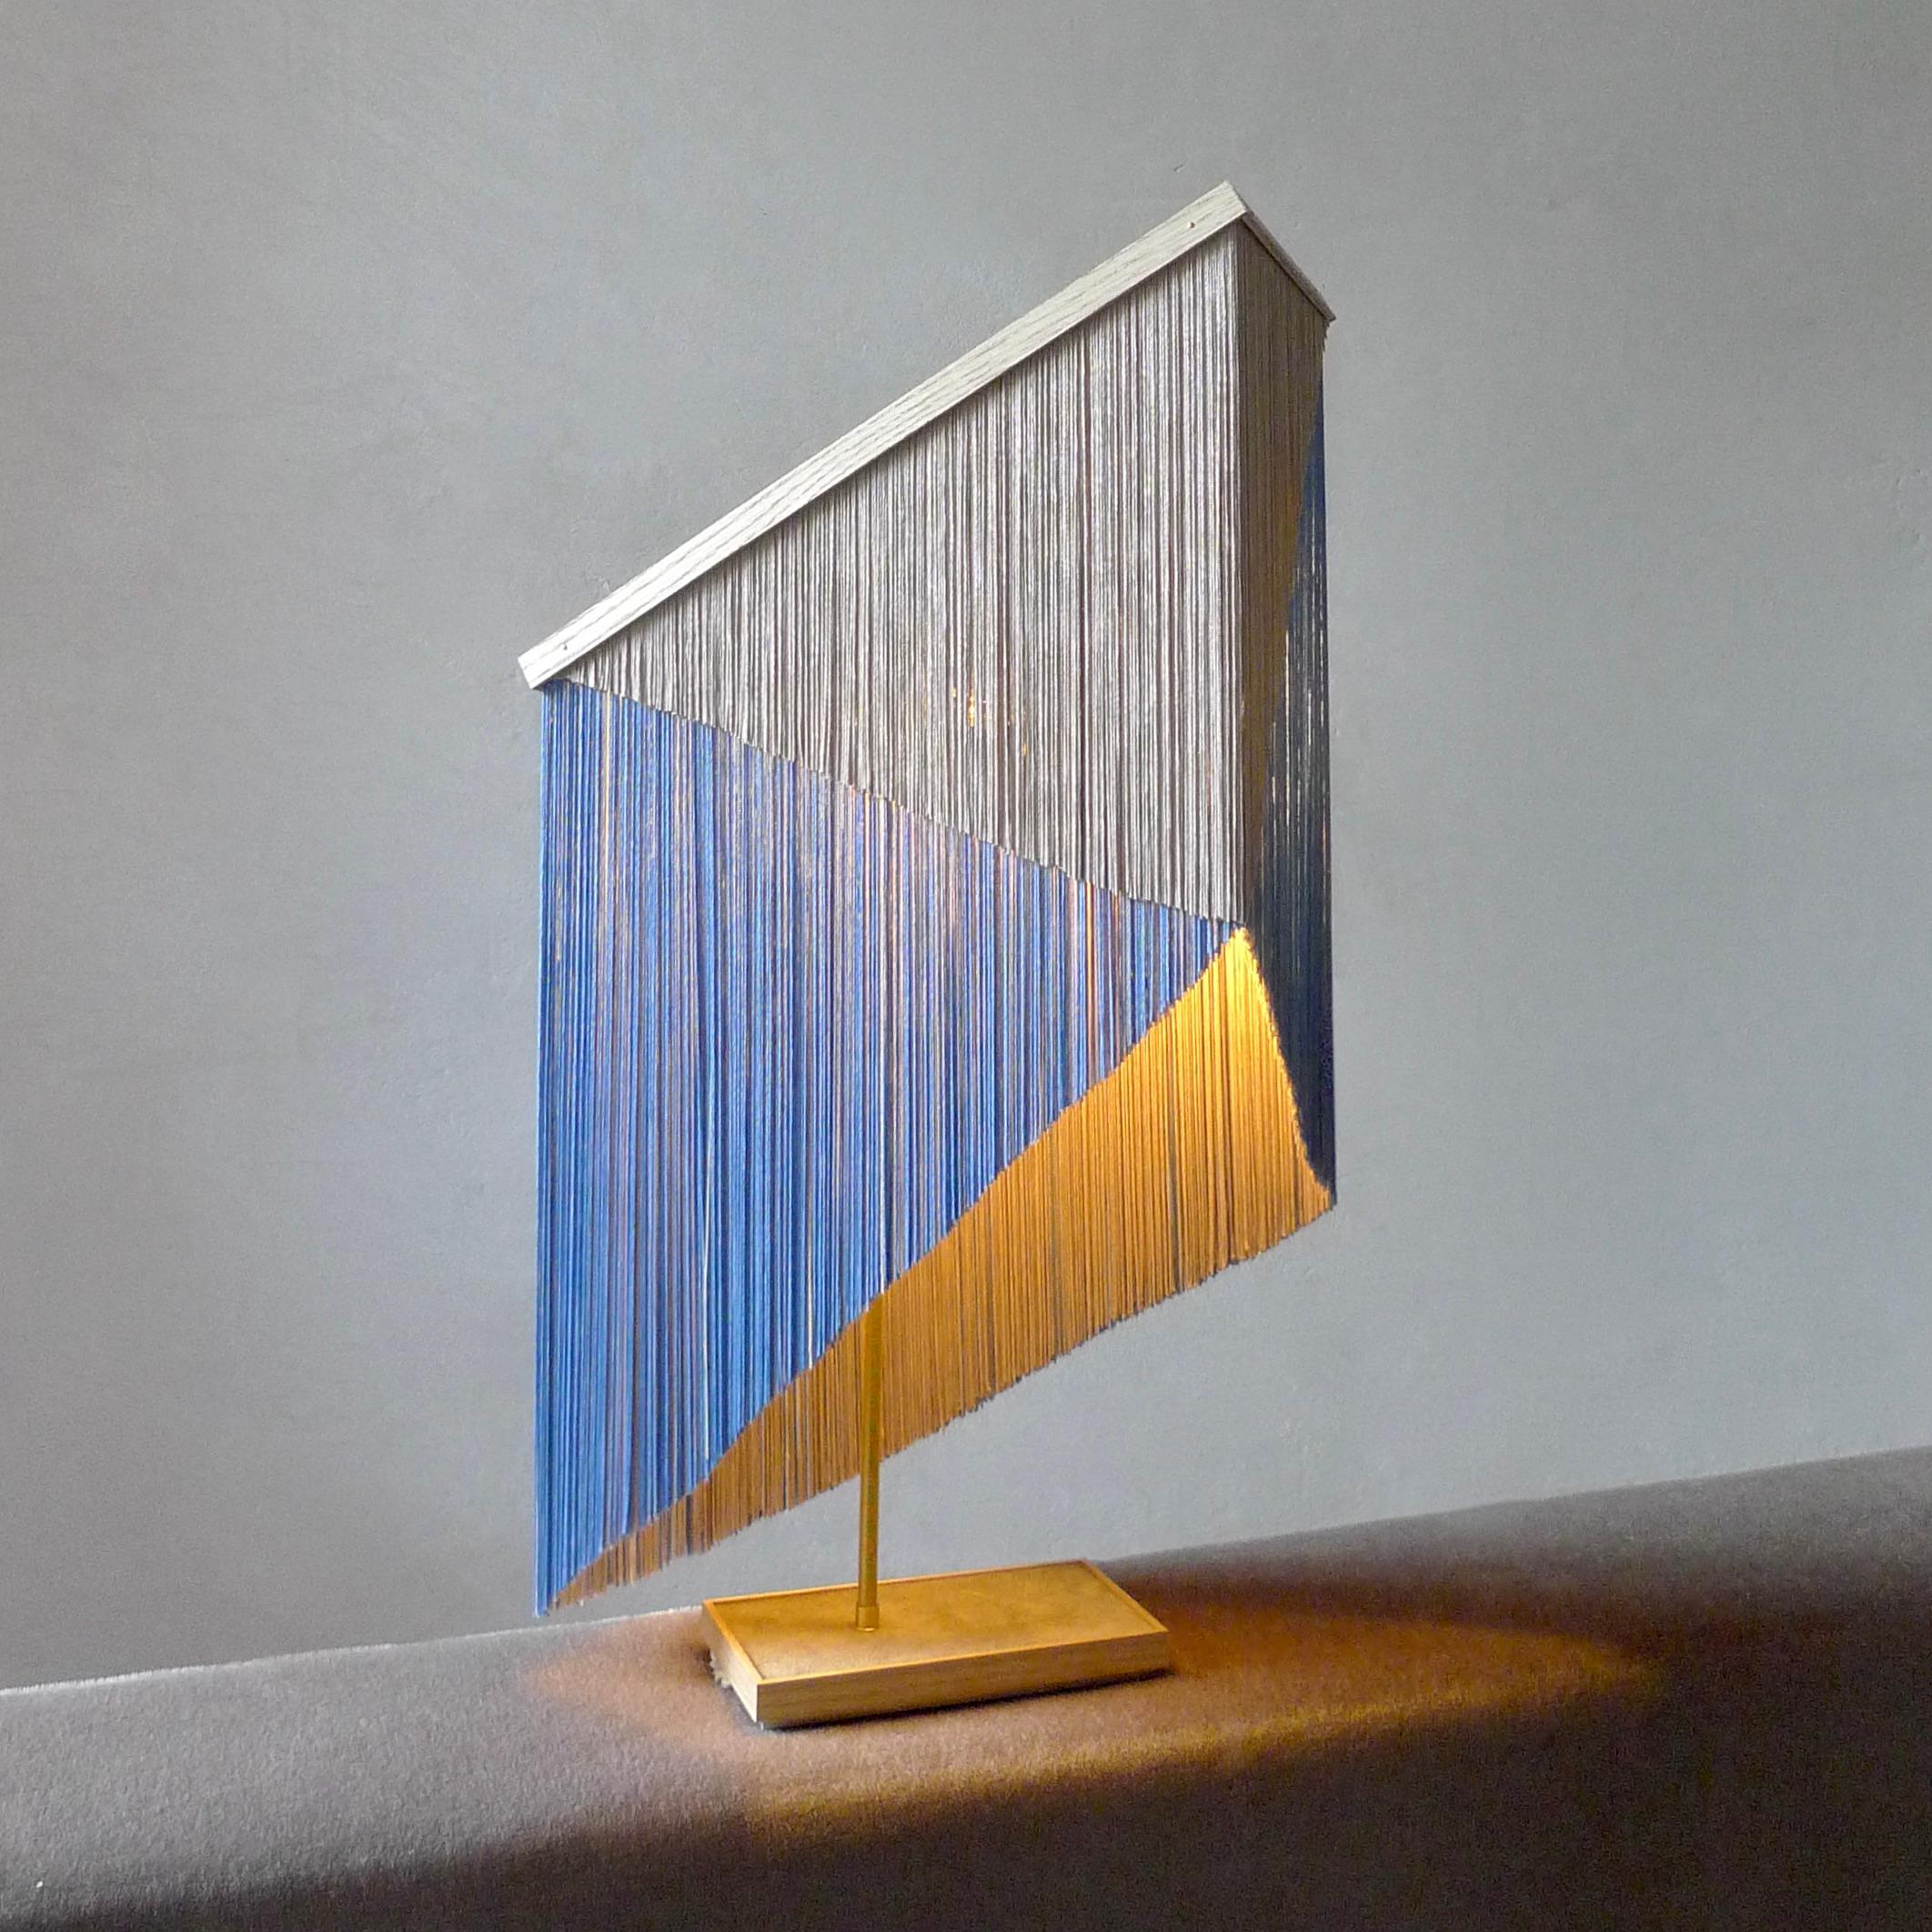 No. 30 Table Lamp by Sander Bottinga
Object size 2
Dimensions: H 57-71 x W 41 x D 17 cm
Materials: Brass, Wood, Leather, Viscose Fringes
Variations available.

Handmade in brass, wood, leather and 3 double layered viscose fringes in

geometric cut